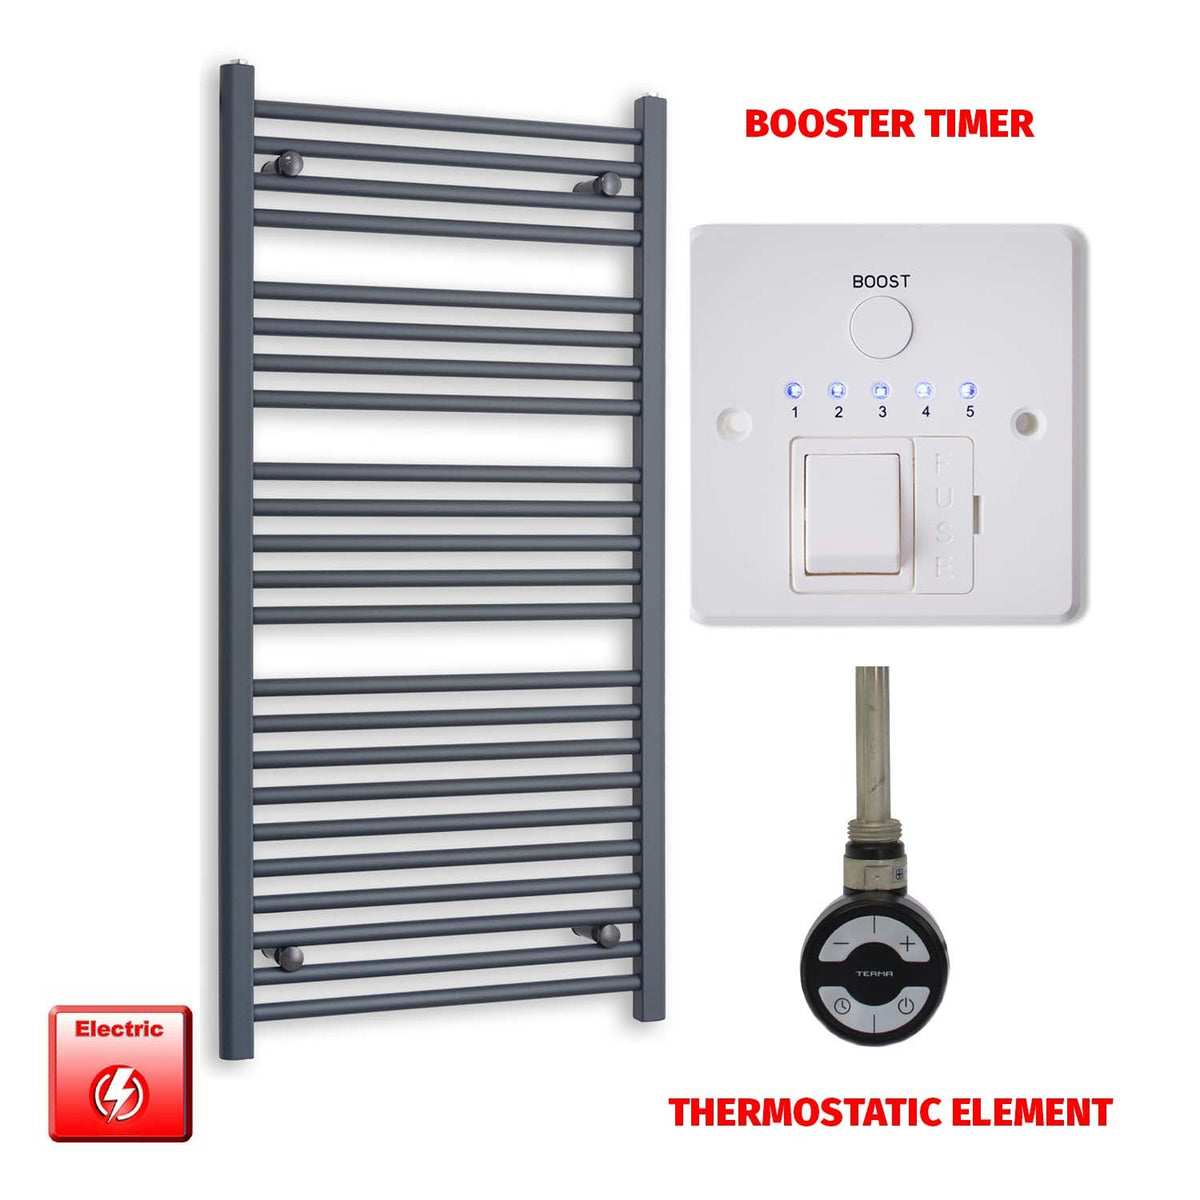 1200mm High 600mm Wide Flat Anthracite Pre-Filled Electric Heated Towel Rail Radiator HTR MOA Thermostatic element Booster timer